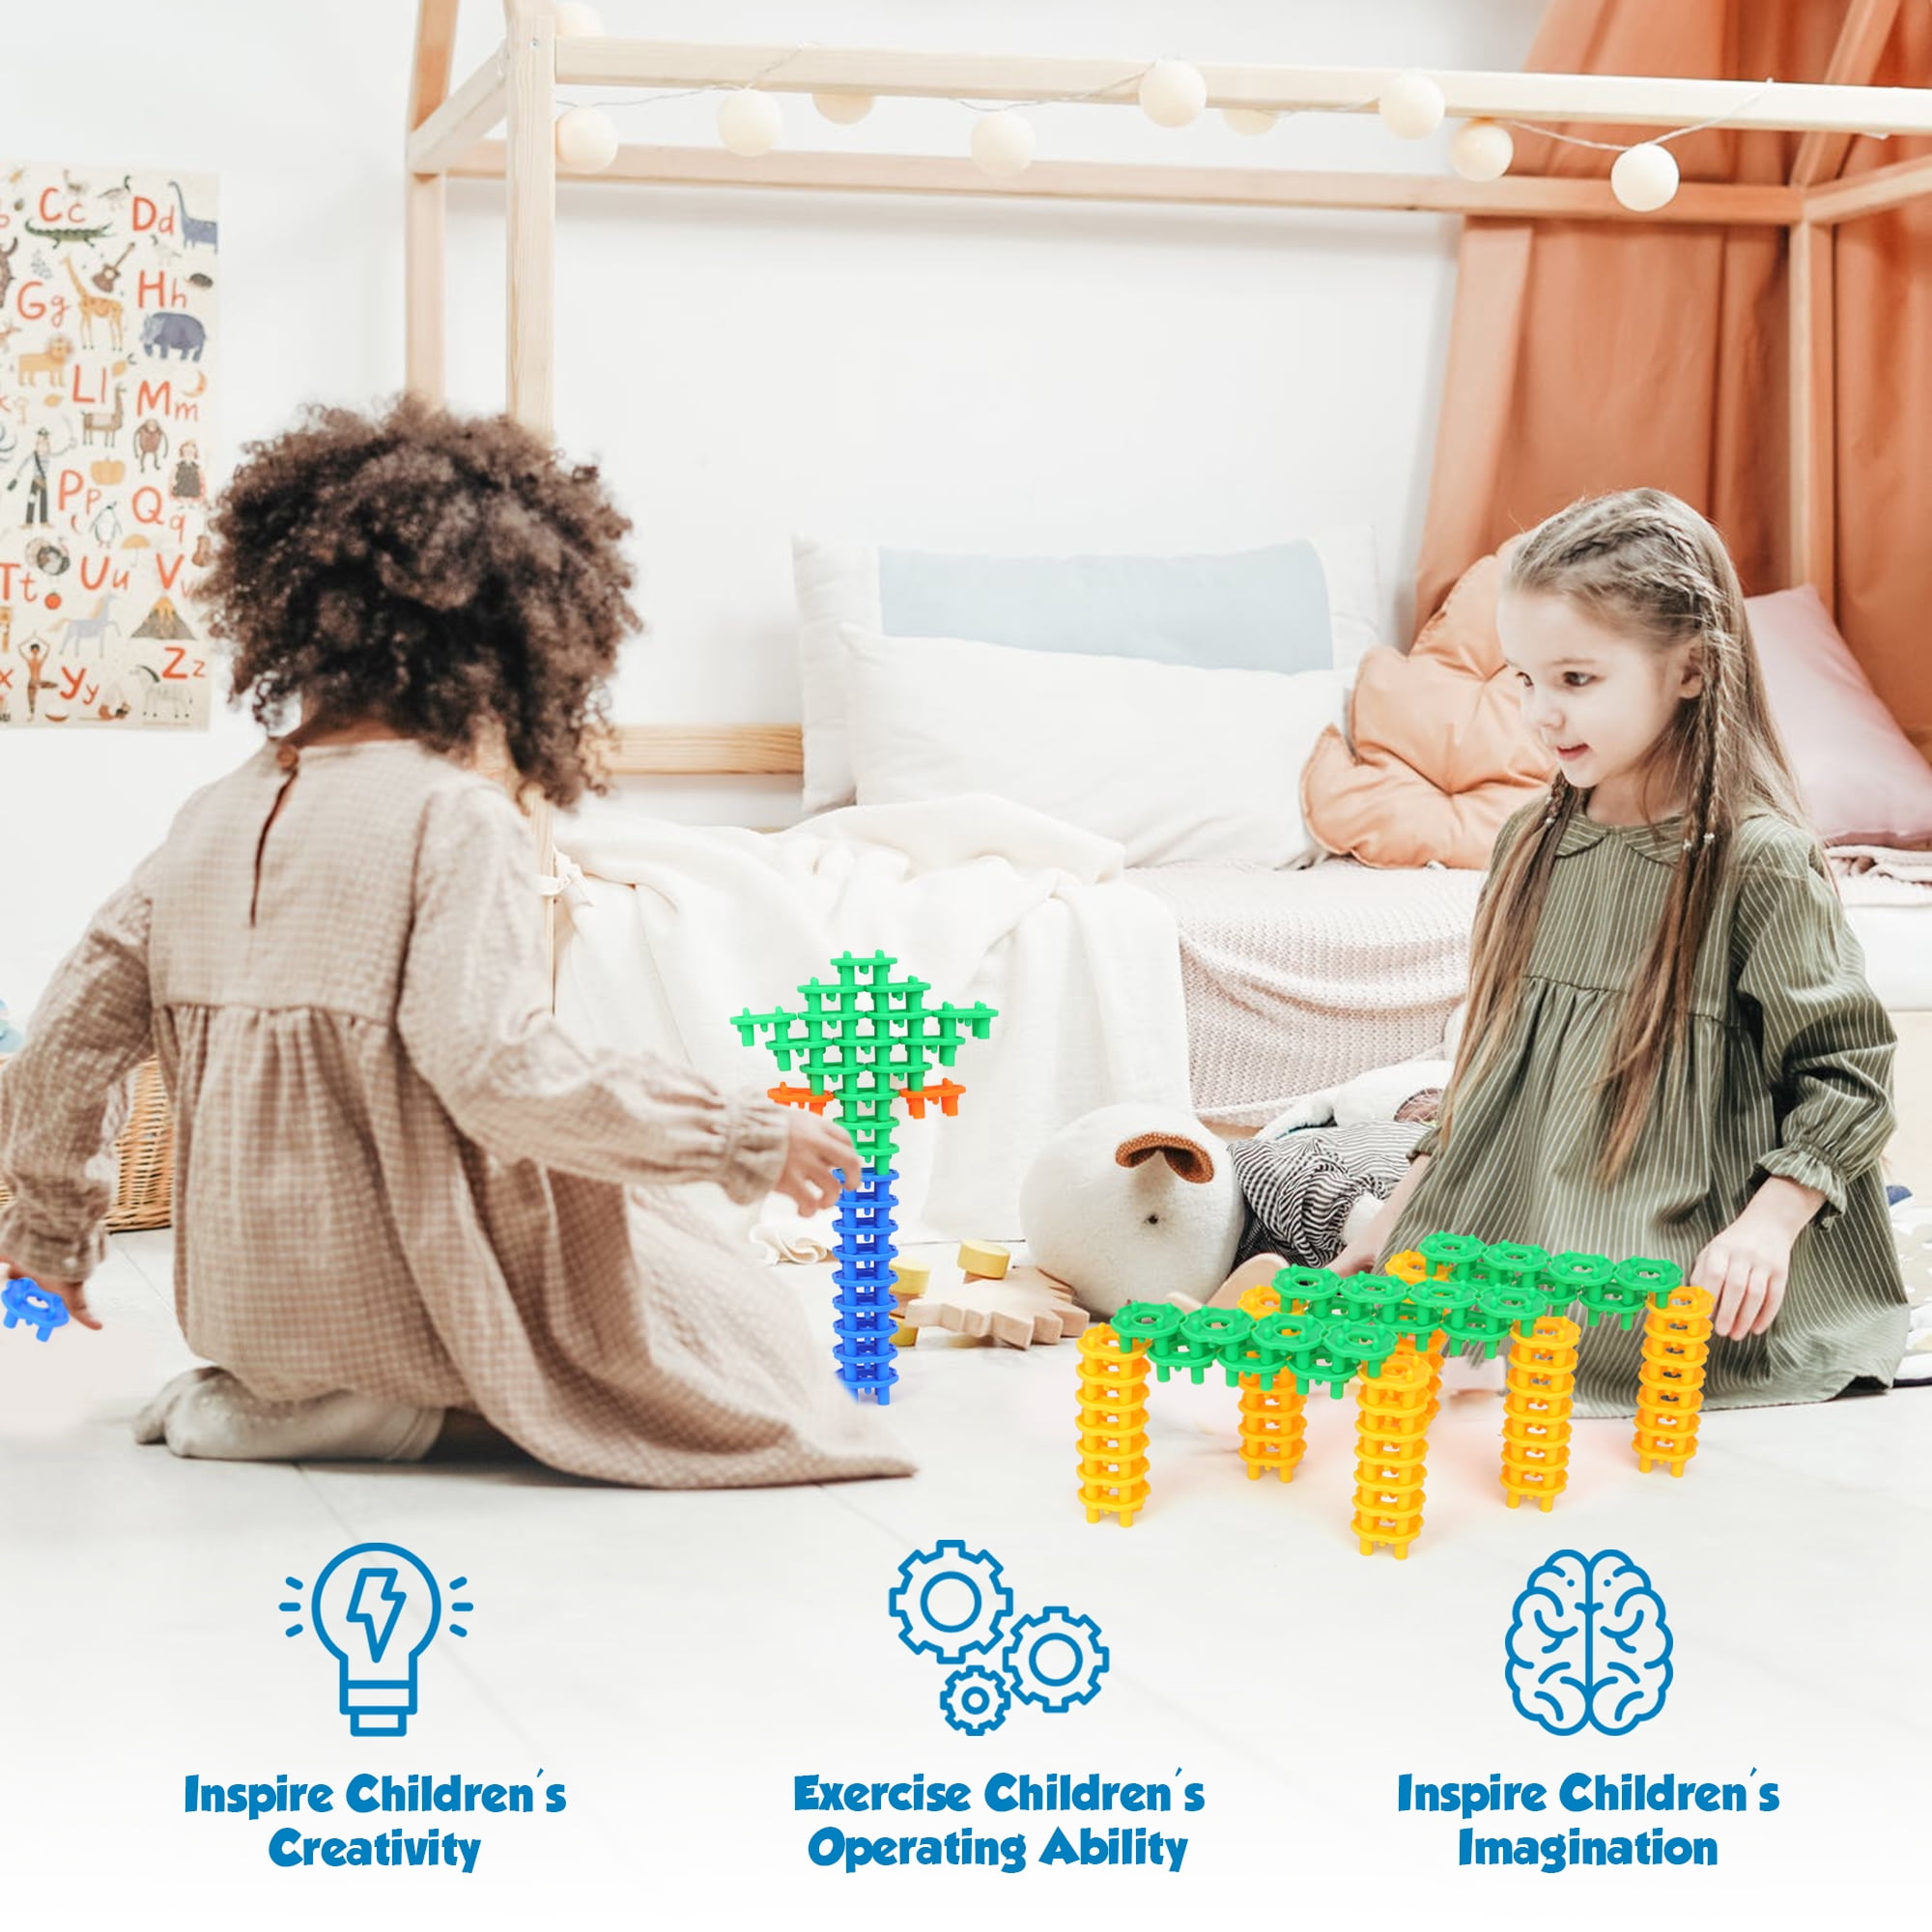 Play Build Platformers Building Plastic Toys. STEM Building Toy for School, Toddler Play, Activities, Fine Motor Skill Development. Snap Together Toys Ages 3+.